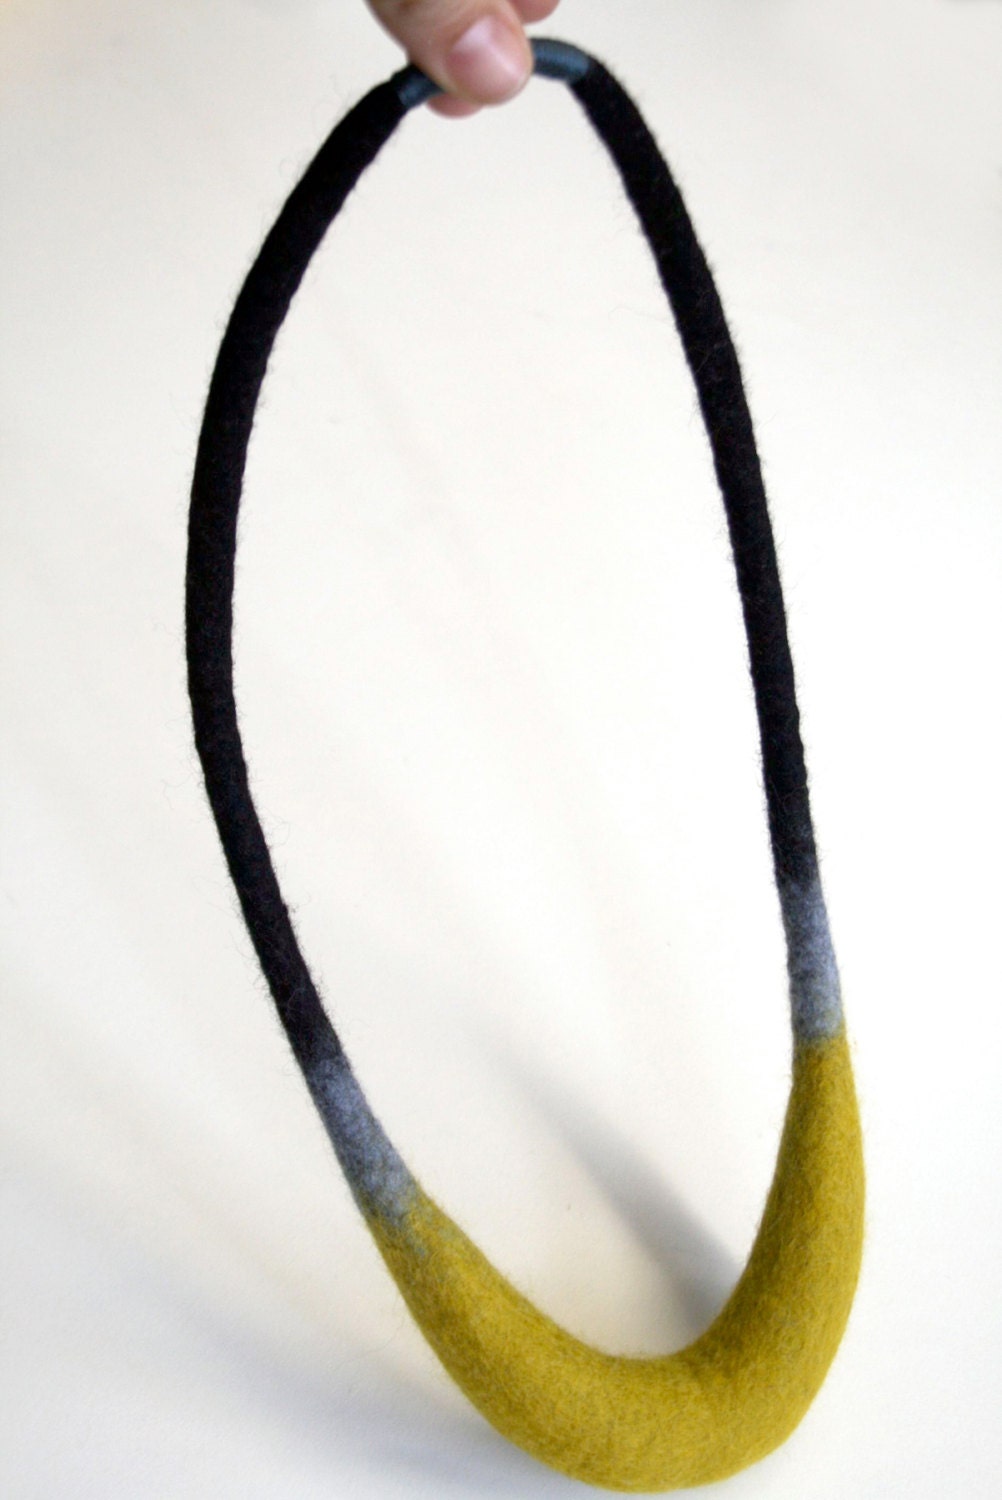 Crescent Necklace - Hand Felted Merino Wool - Mustard, Steel Blue and Black - One of a Kind - papaververt